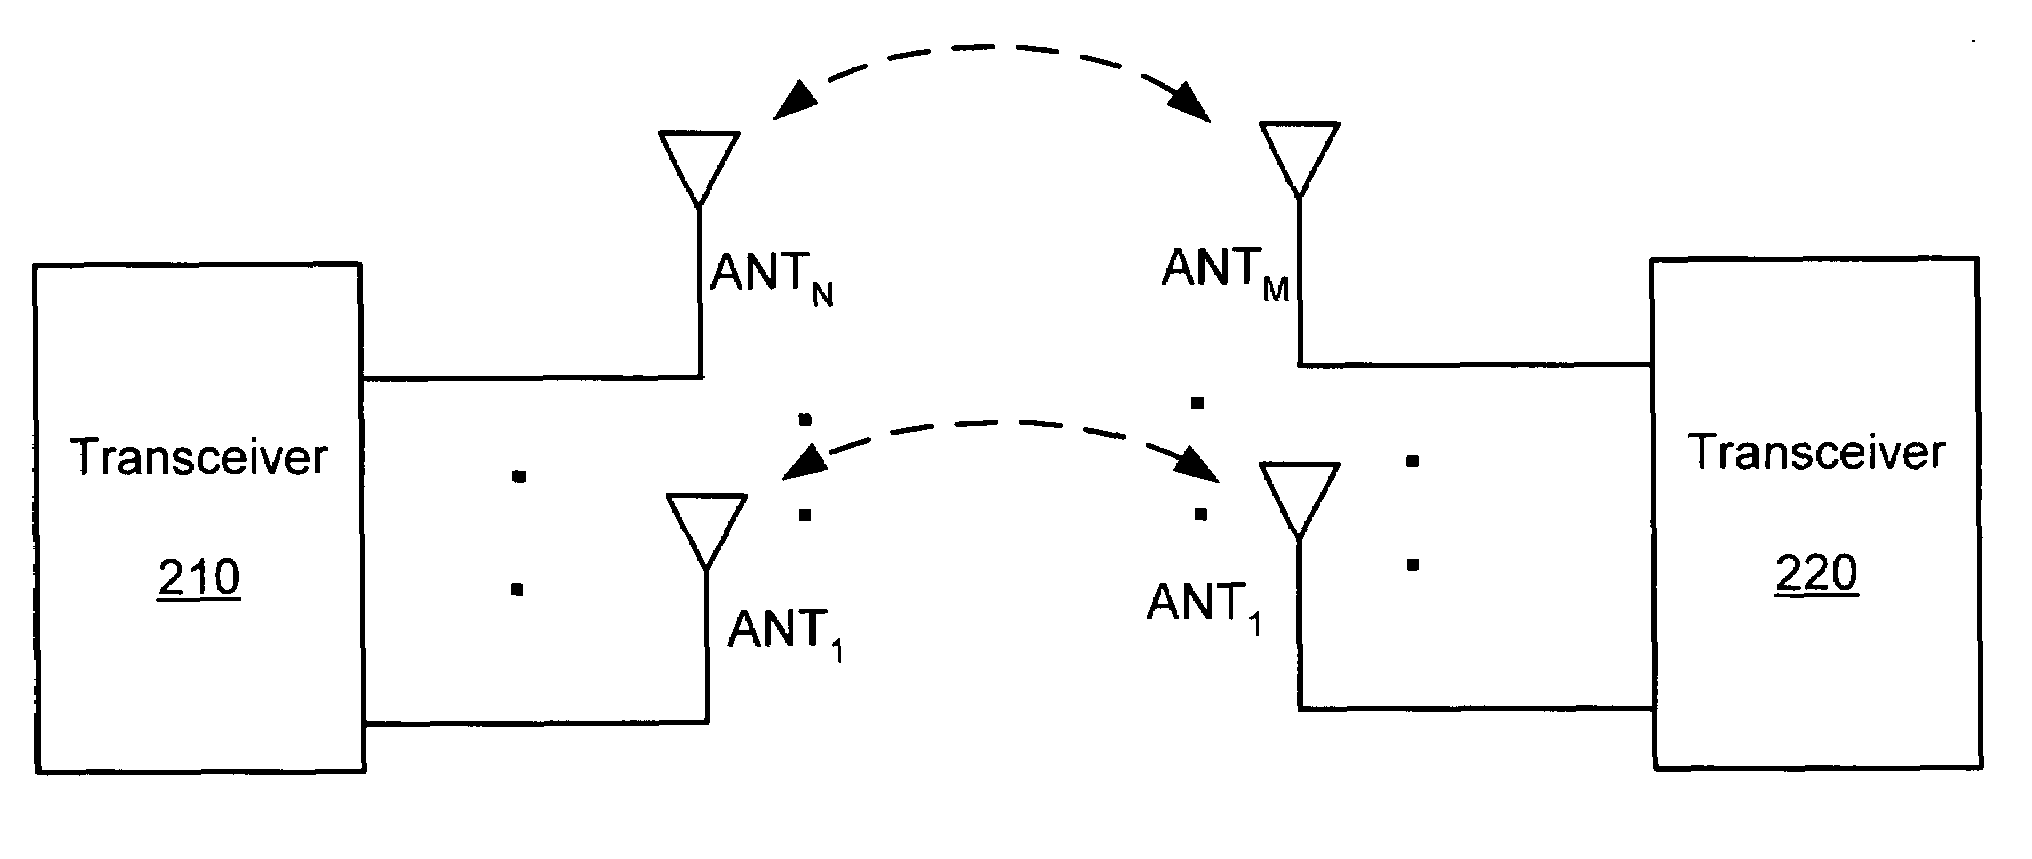 Antenna pattern selection within a wireless network